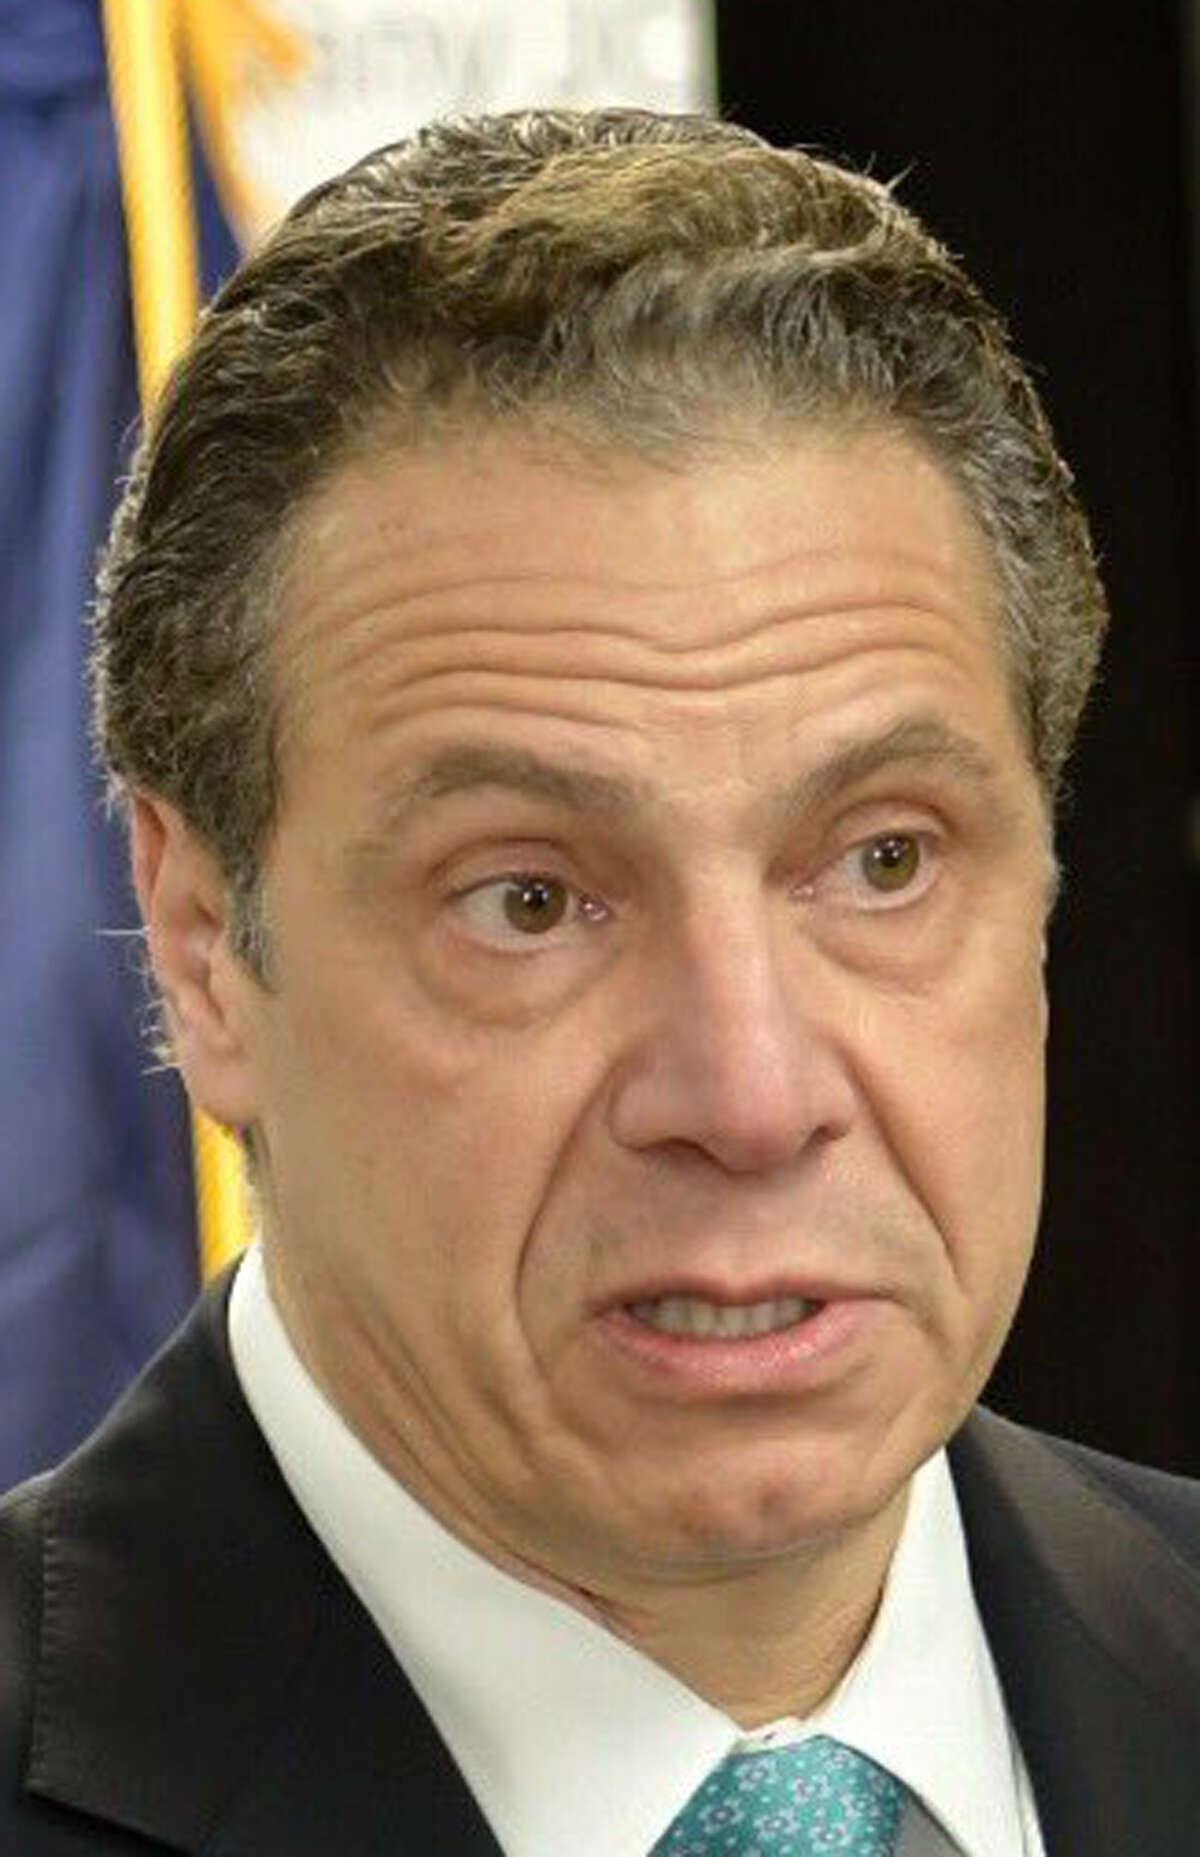 Gov. Andrew Cuomo speaks about the rash of bomb threats that have targets JCC around the country in recent weeks. Cuomo promised justice would be served and that a State Police task force on hate crimes was investigating the threats. (Skip Dickstein / Times Union)